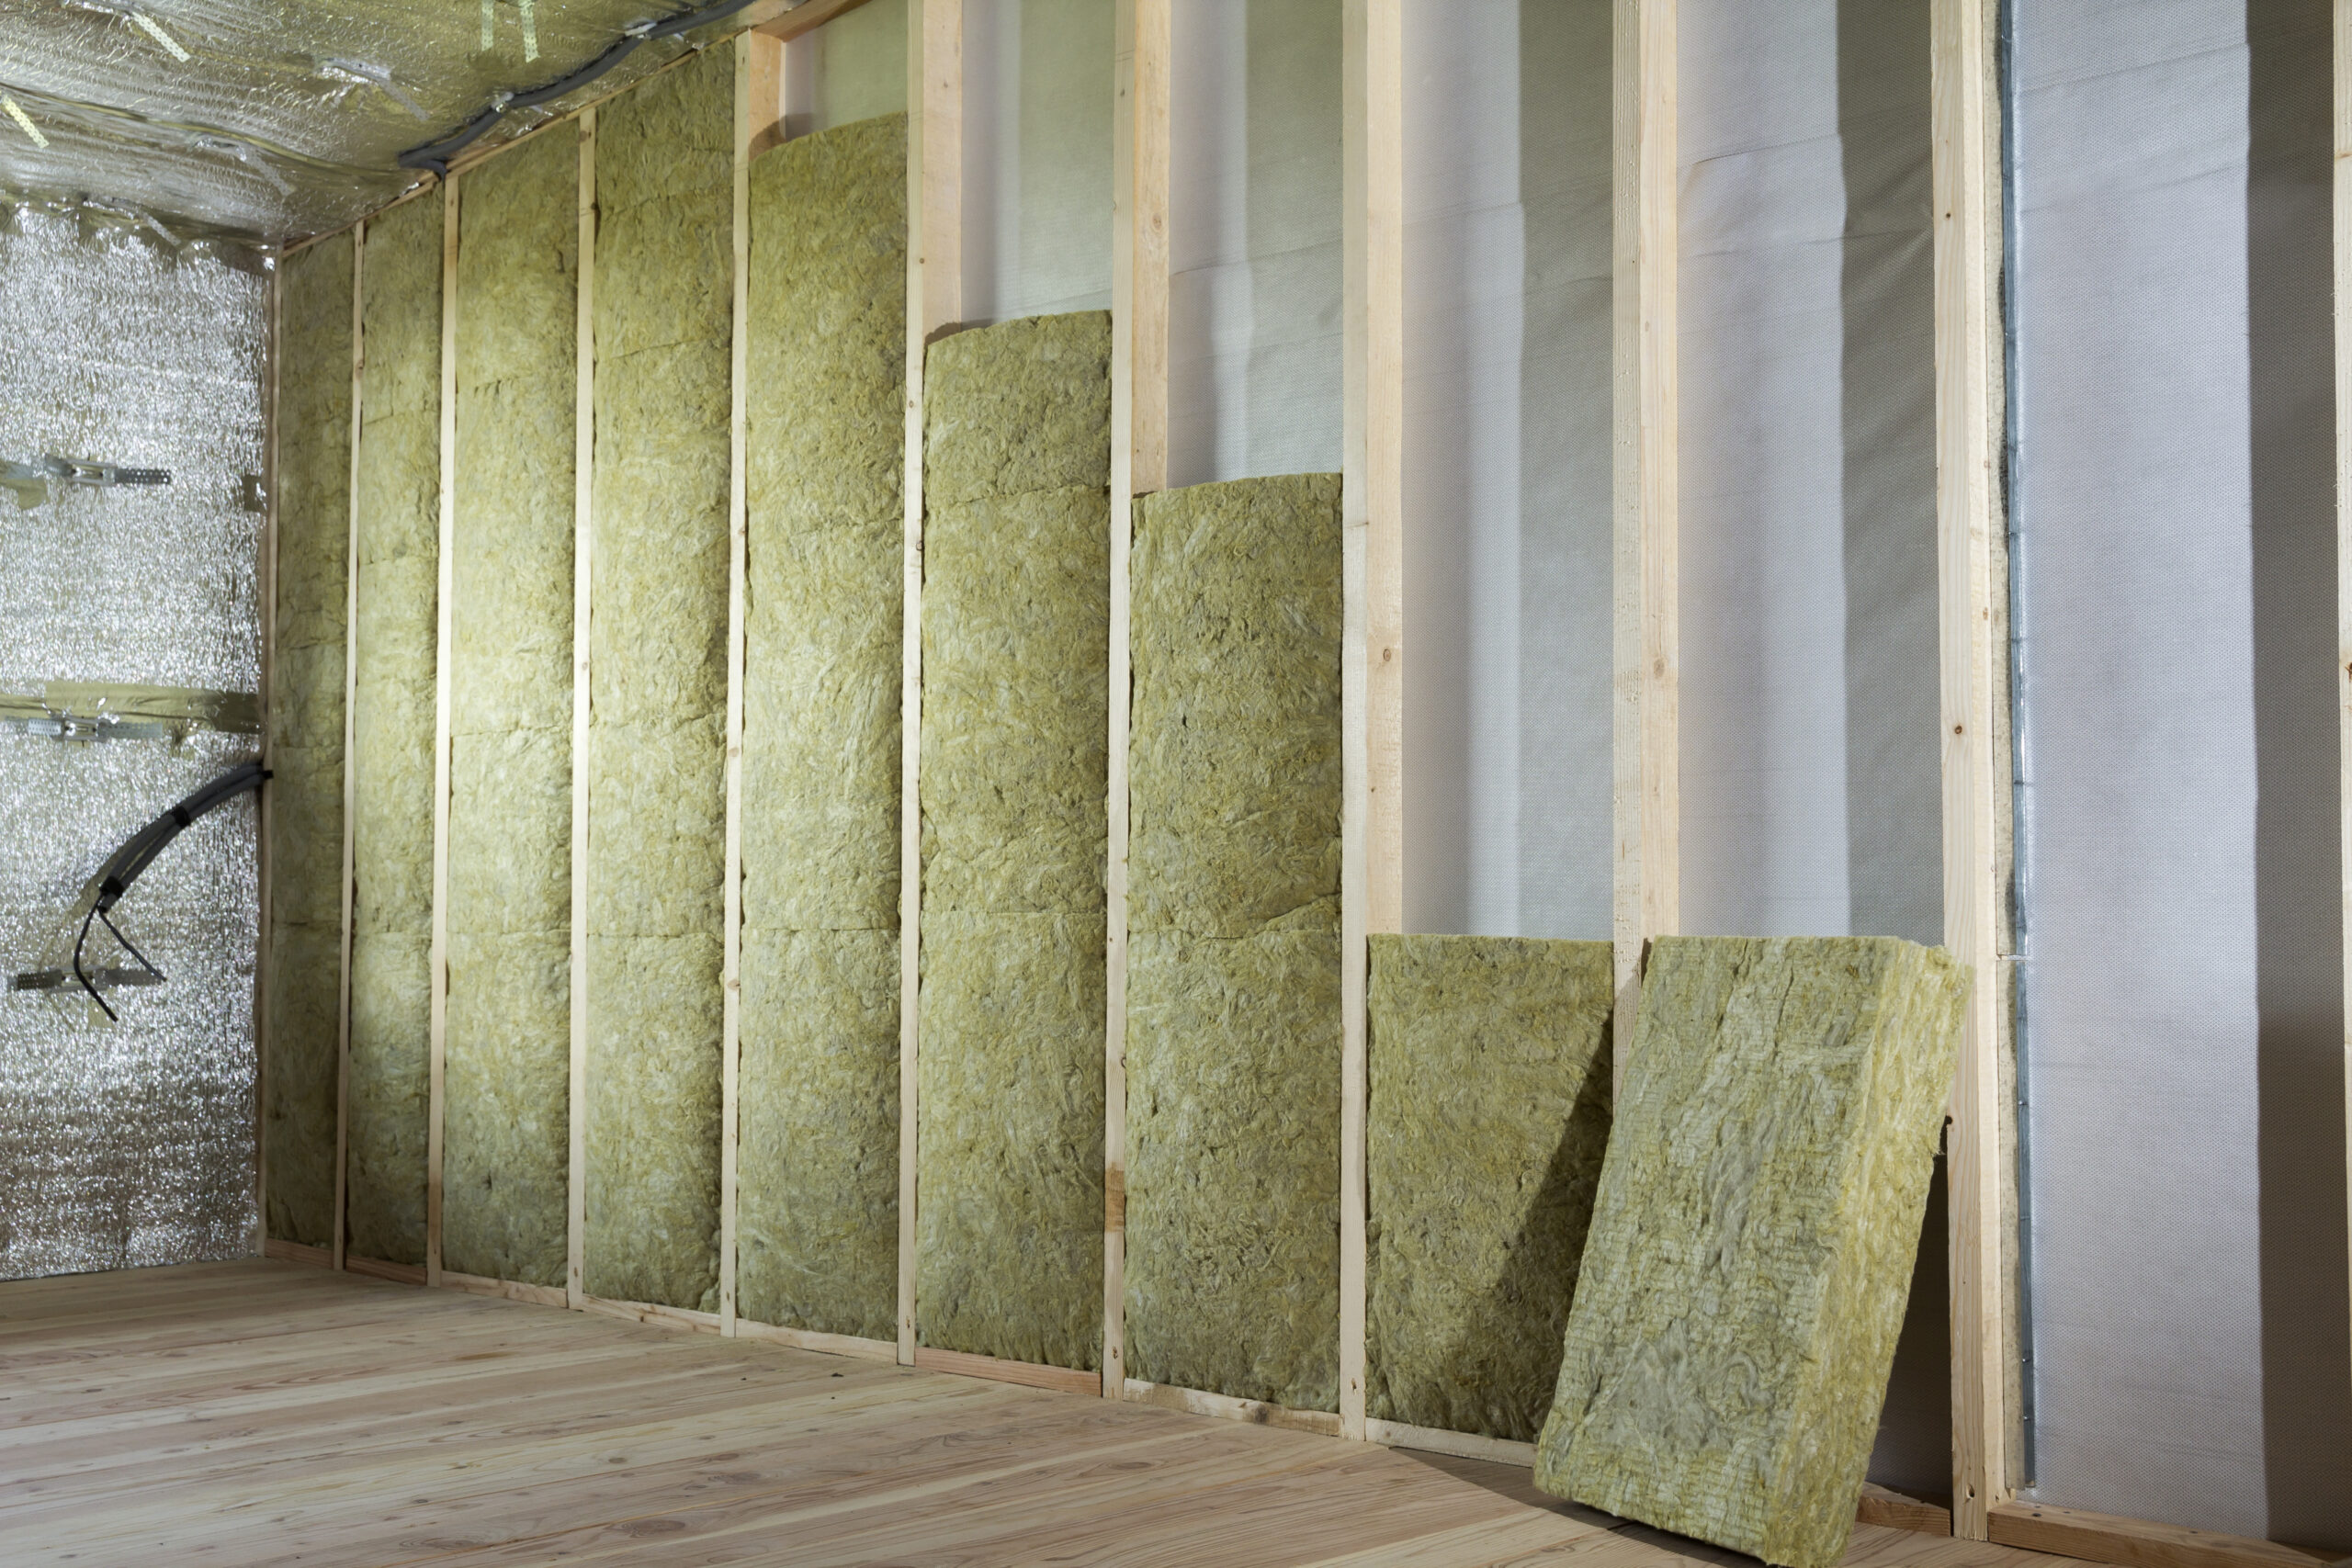 Wooden frame for future walls insulated with rock wool and fiberglass insulation staff for cold barrier. Comfortable warm home, economy, construction and renovation concept.